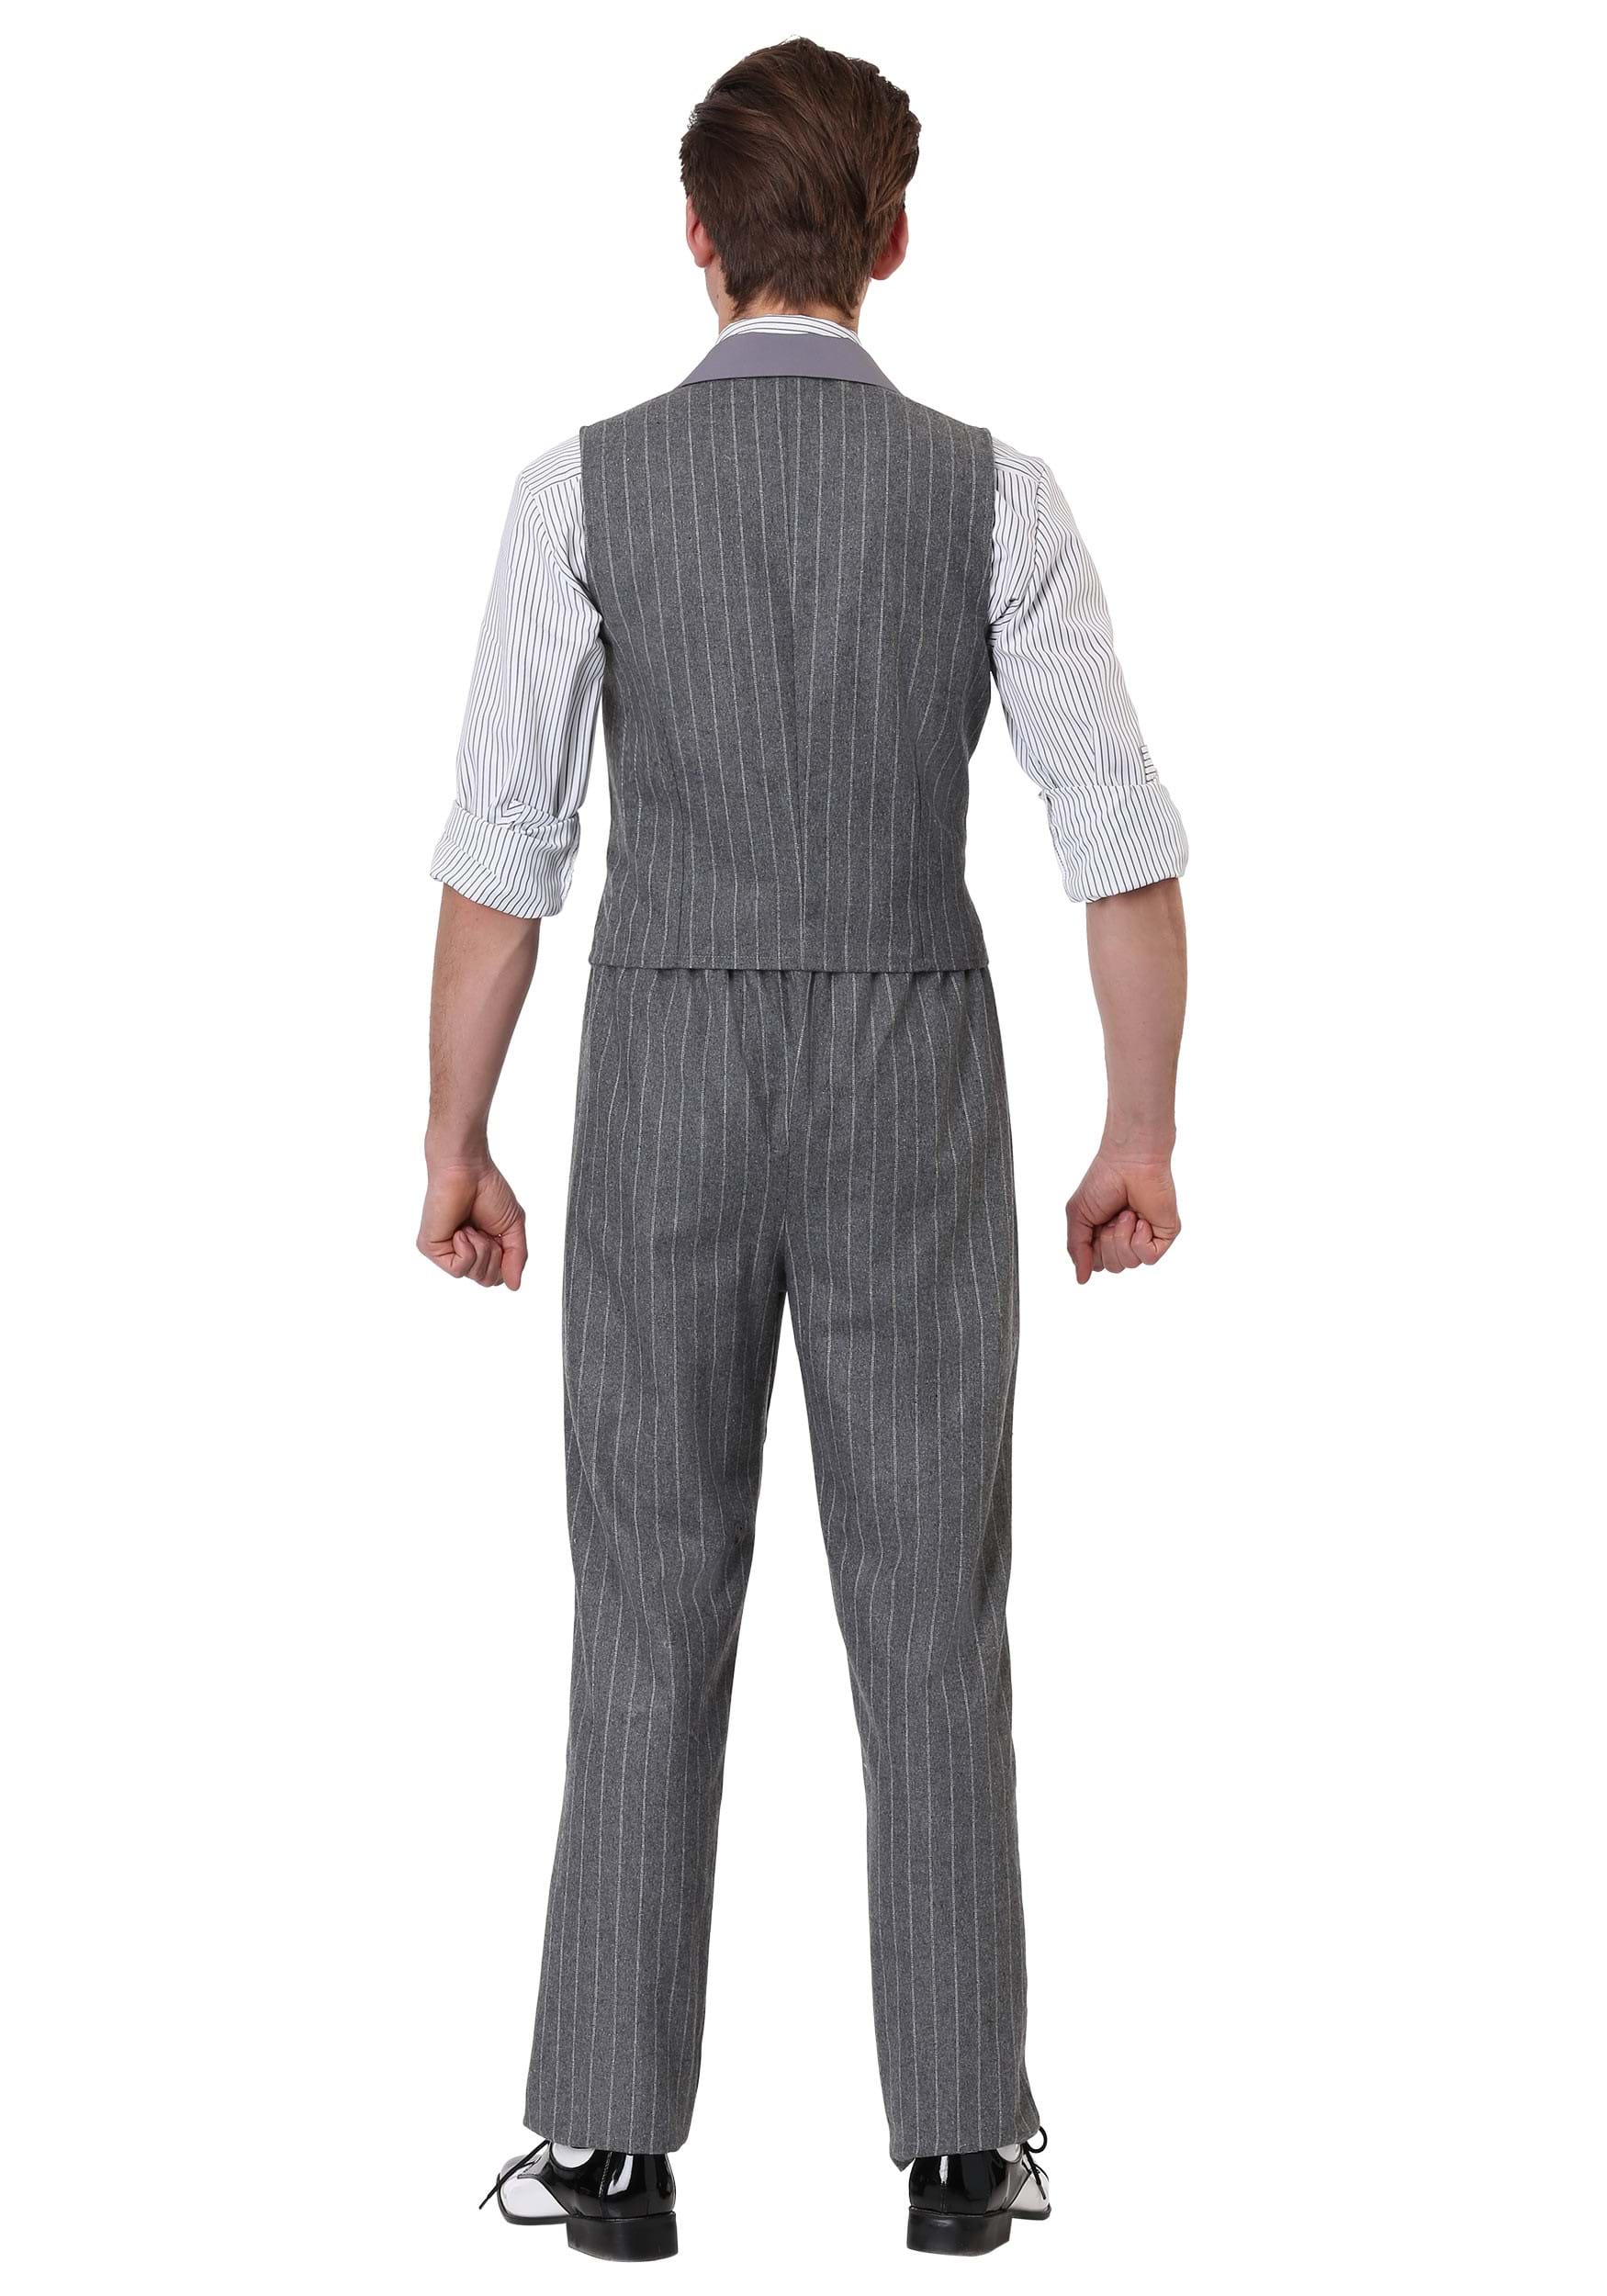 Men's Ruthless Gangster Costume , Adult Decade Costumes